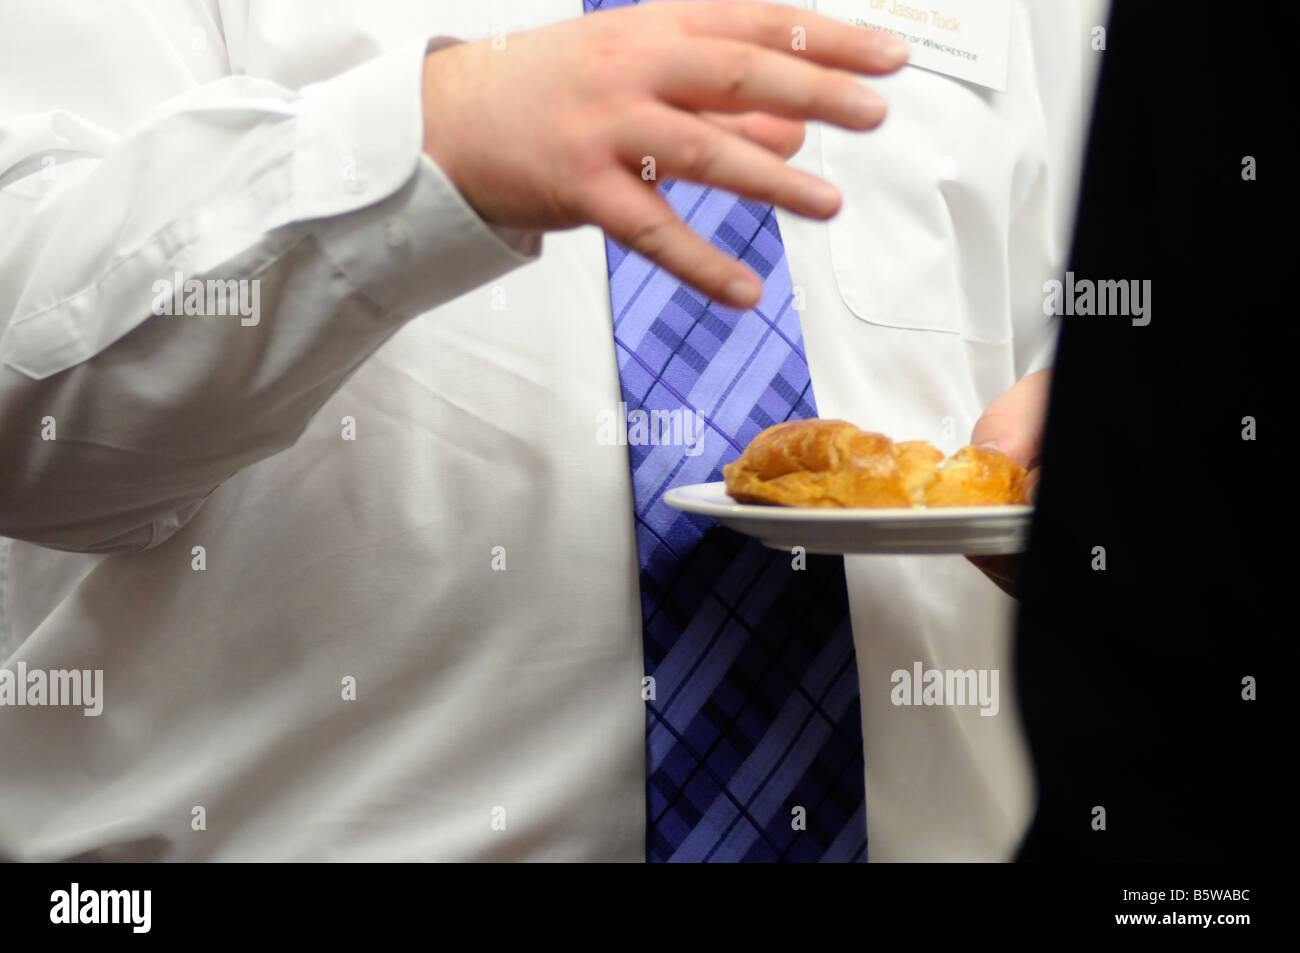 Royalty free photograph of overweight business man eating an unhealthy meal at a meeting in a hotel in London UK Stock Photo